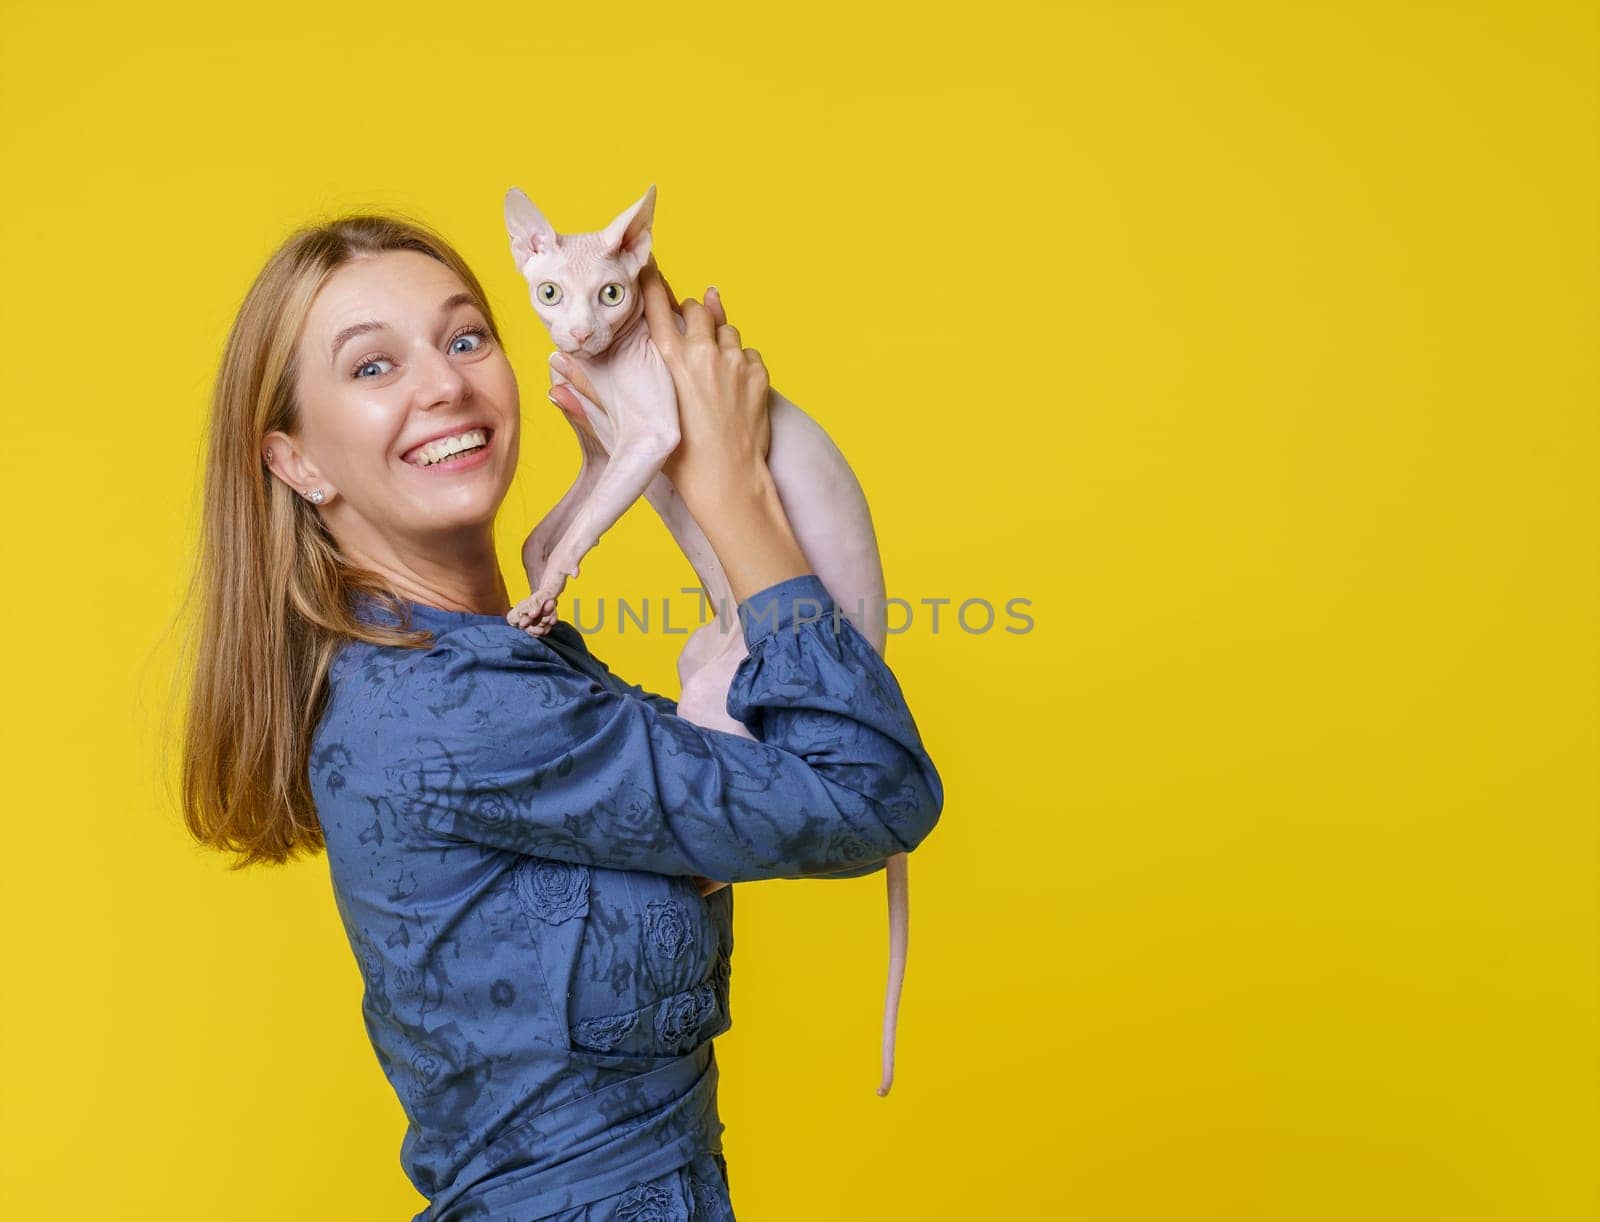 Woman shares heartwarming moment with beloved cat and kisses it affectionately and holds it in hands. Deep bond and love between pet owner and feline companion, reflecting joyful and cherished connection. High quality photo